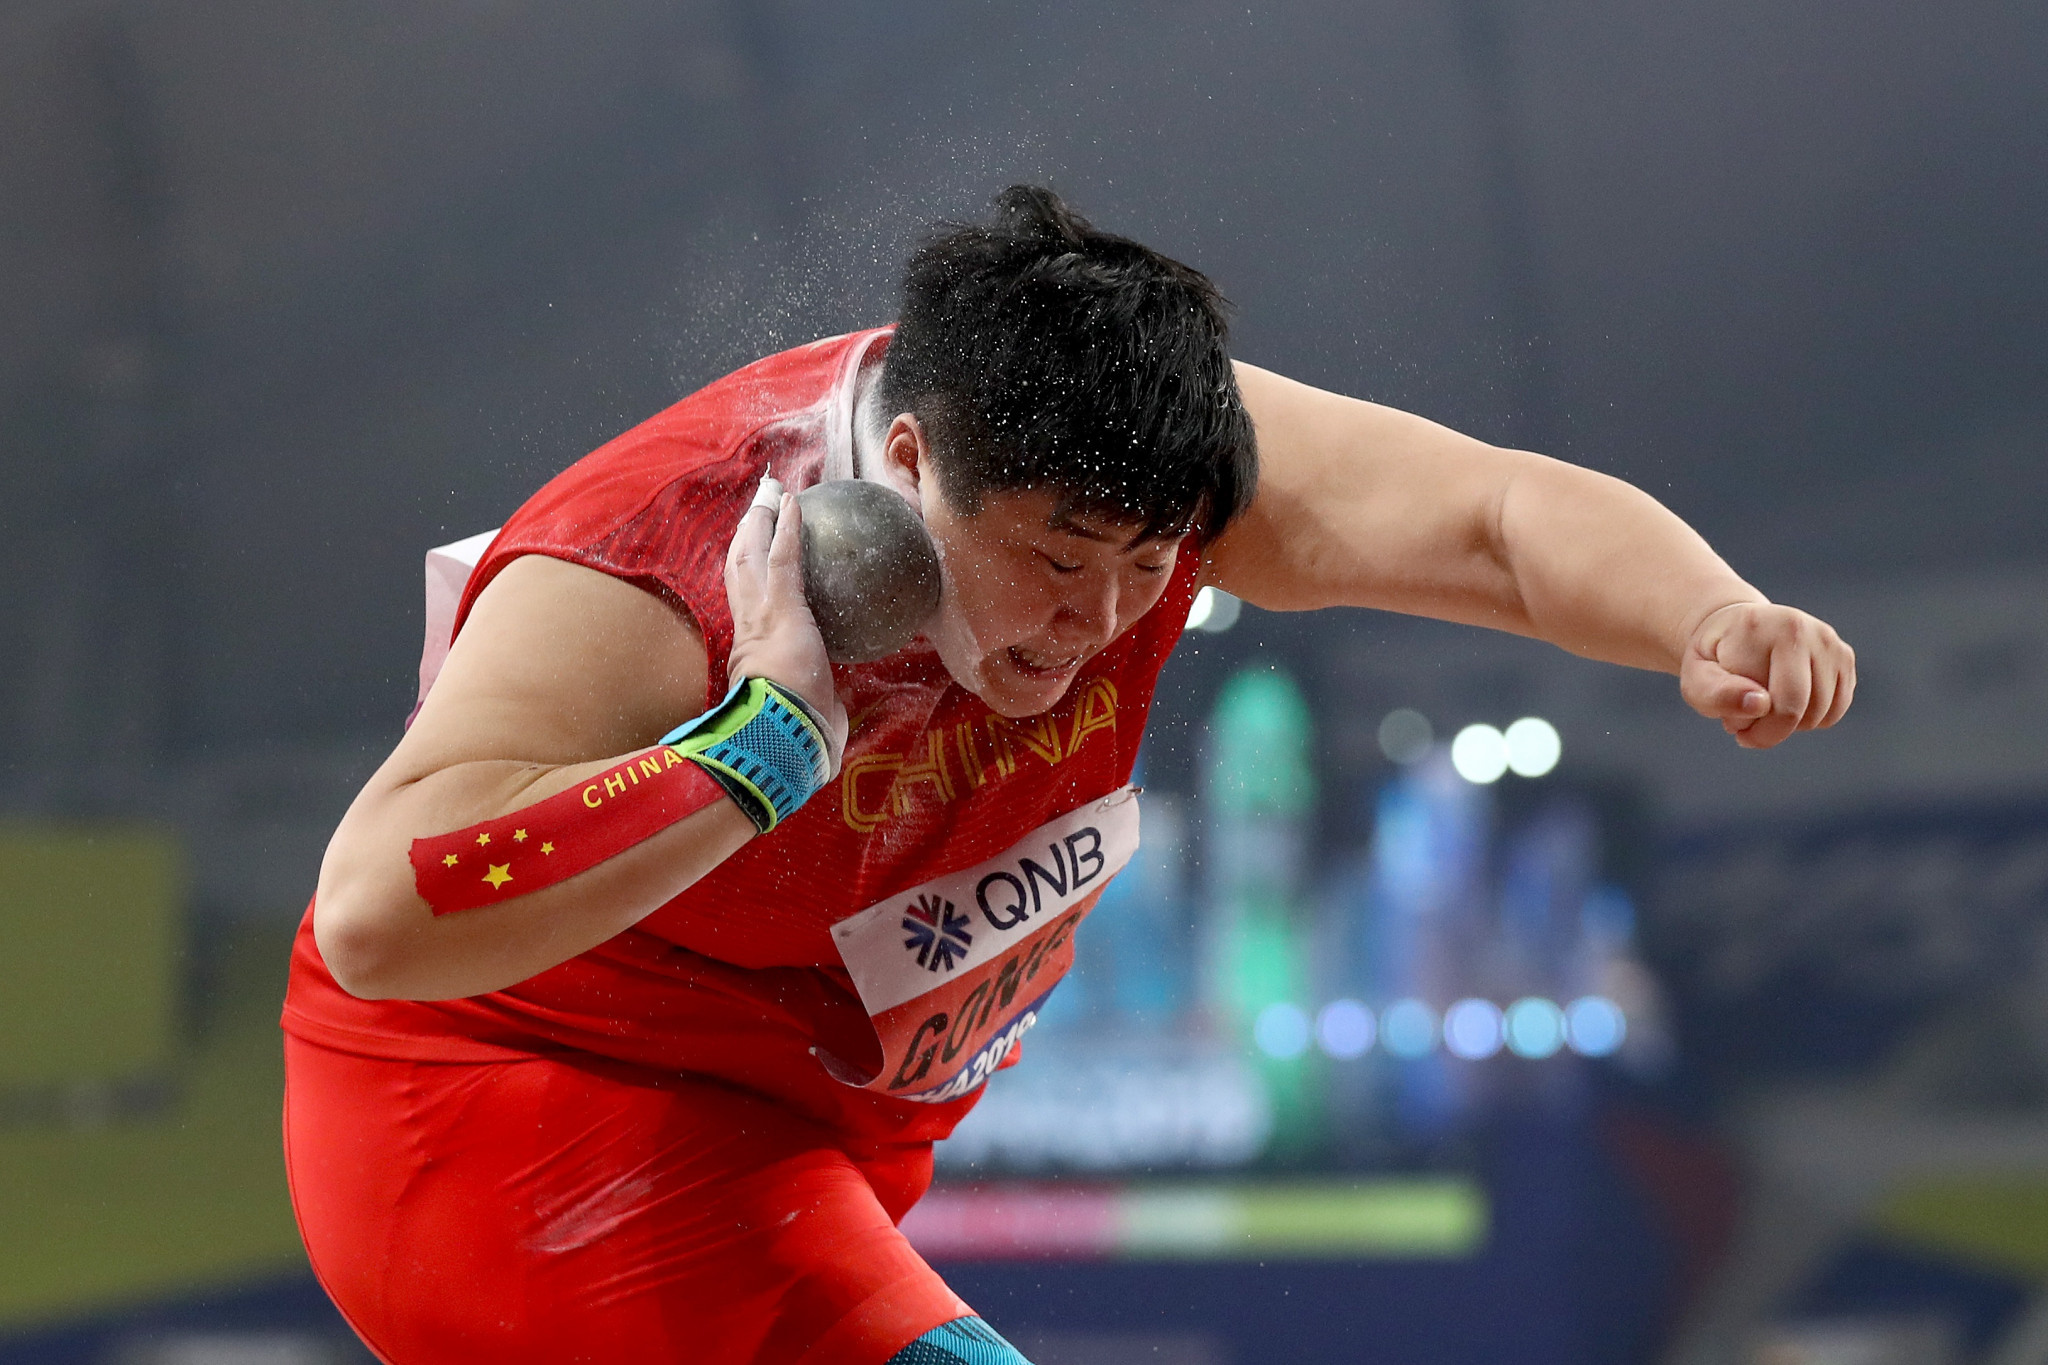 Two-time world shot put champion Gong Lijiao has thrown a world-leading 19.70 metres ©Getty Images